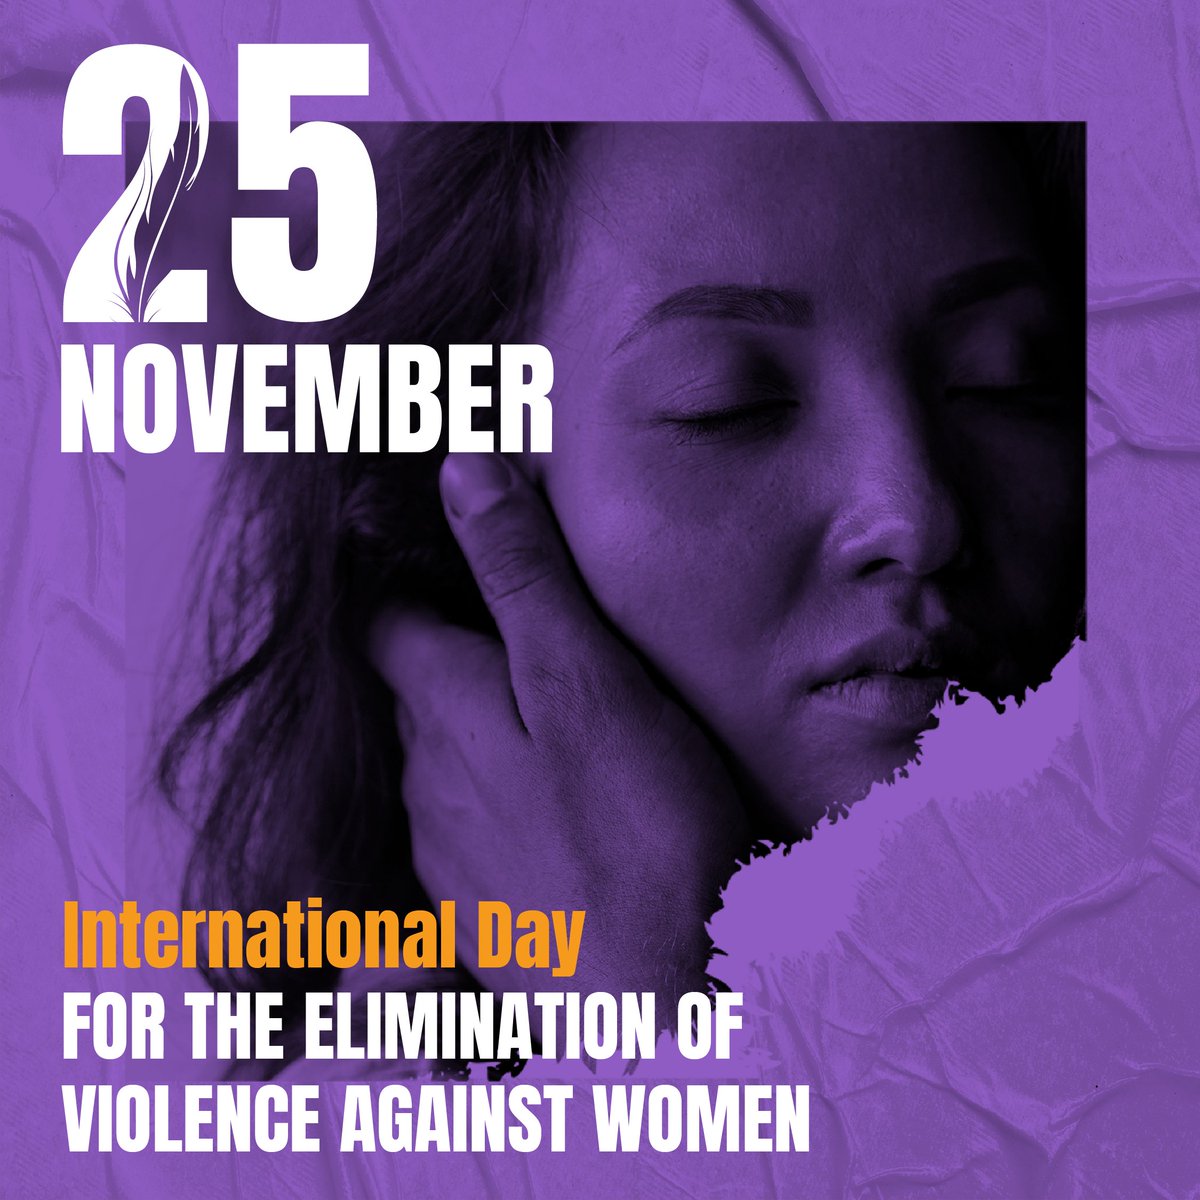 1/3 Today is the International Day for the Elimination of Violence Against Women. Violence against women and girls remains one of the most widespread human rights violations in the world. For Indigenous #WGT2SGD people, violence is even more prevalent.